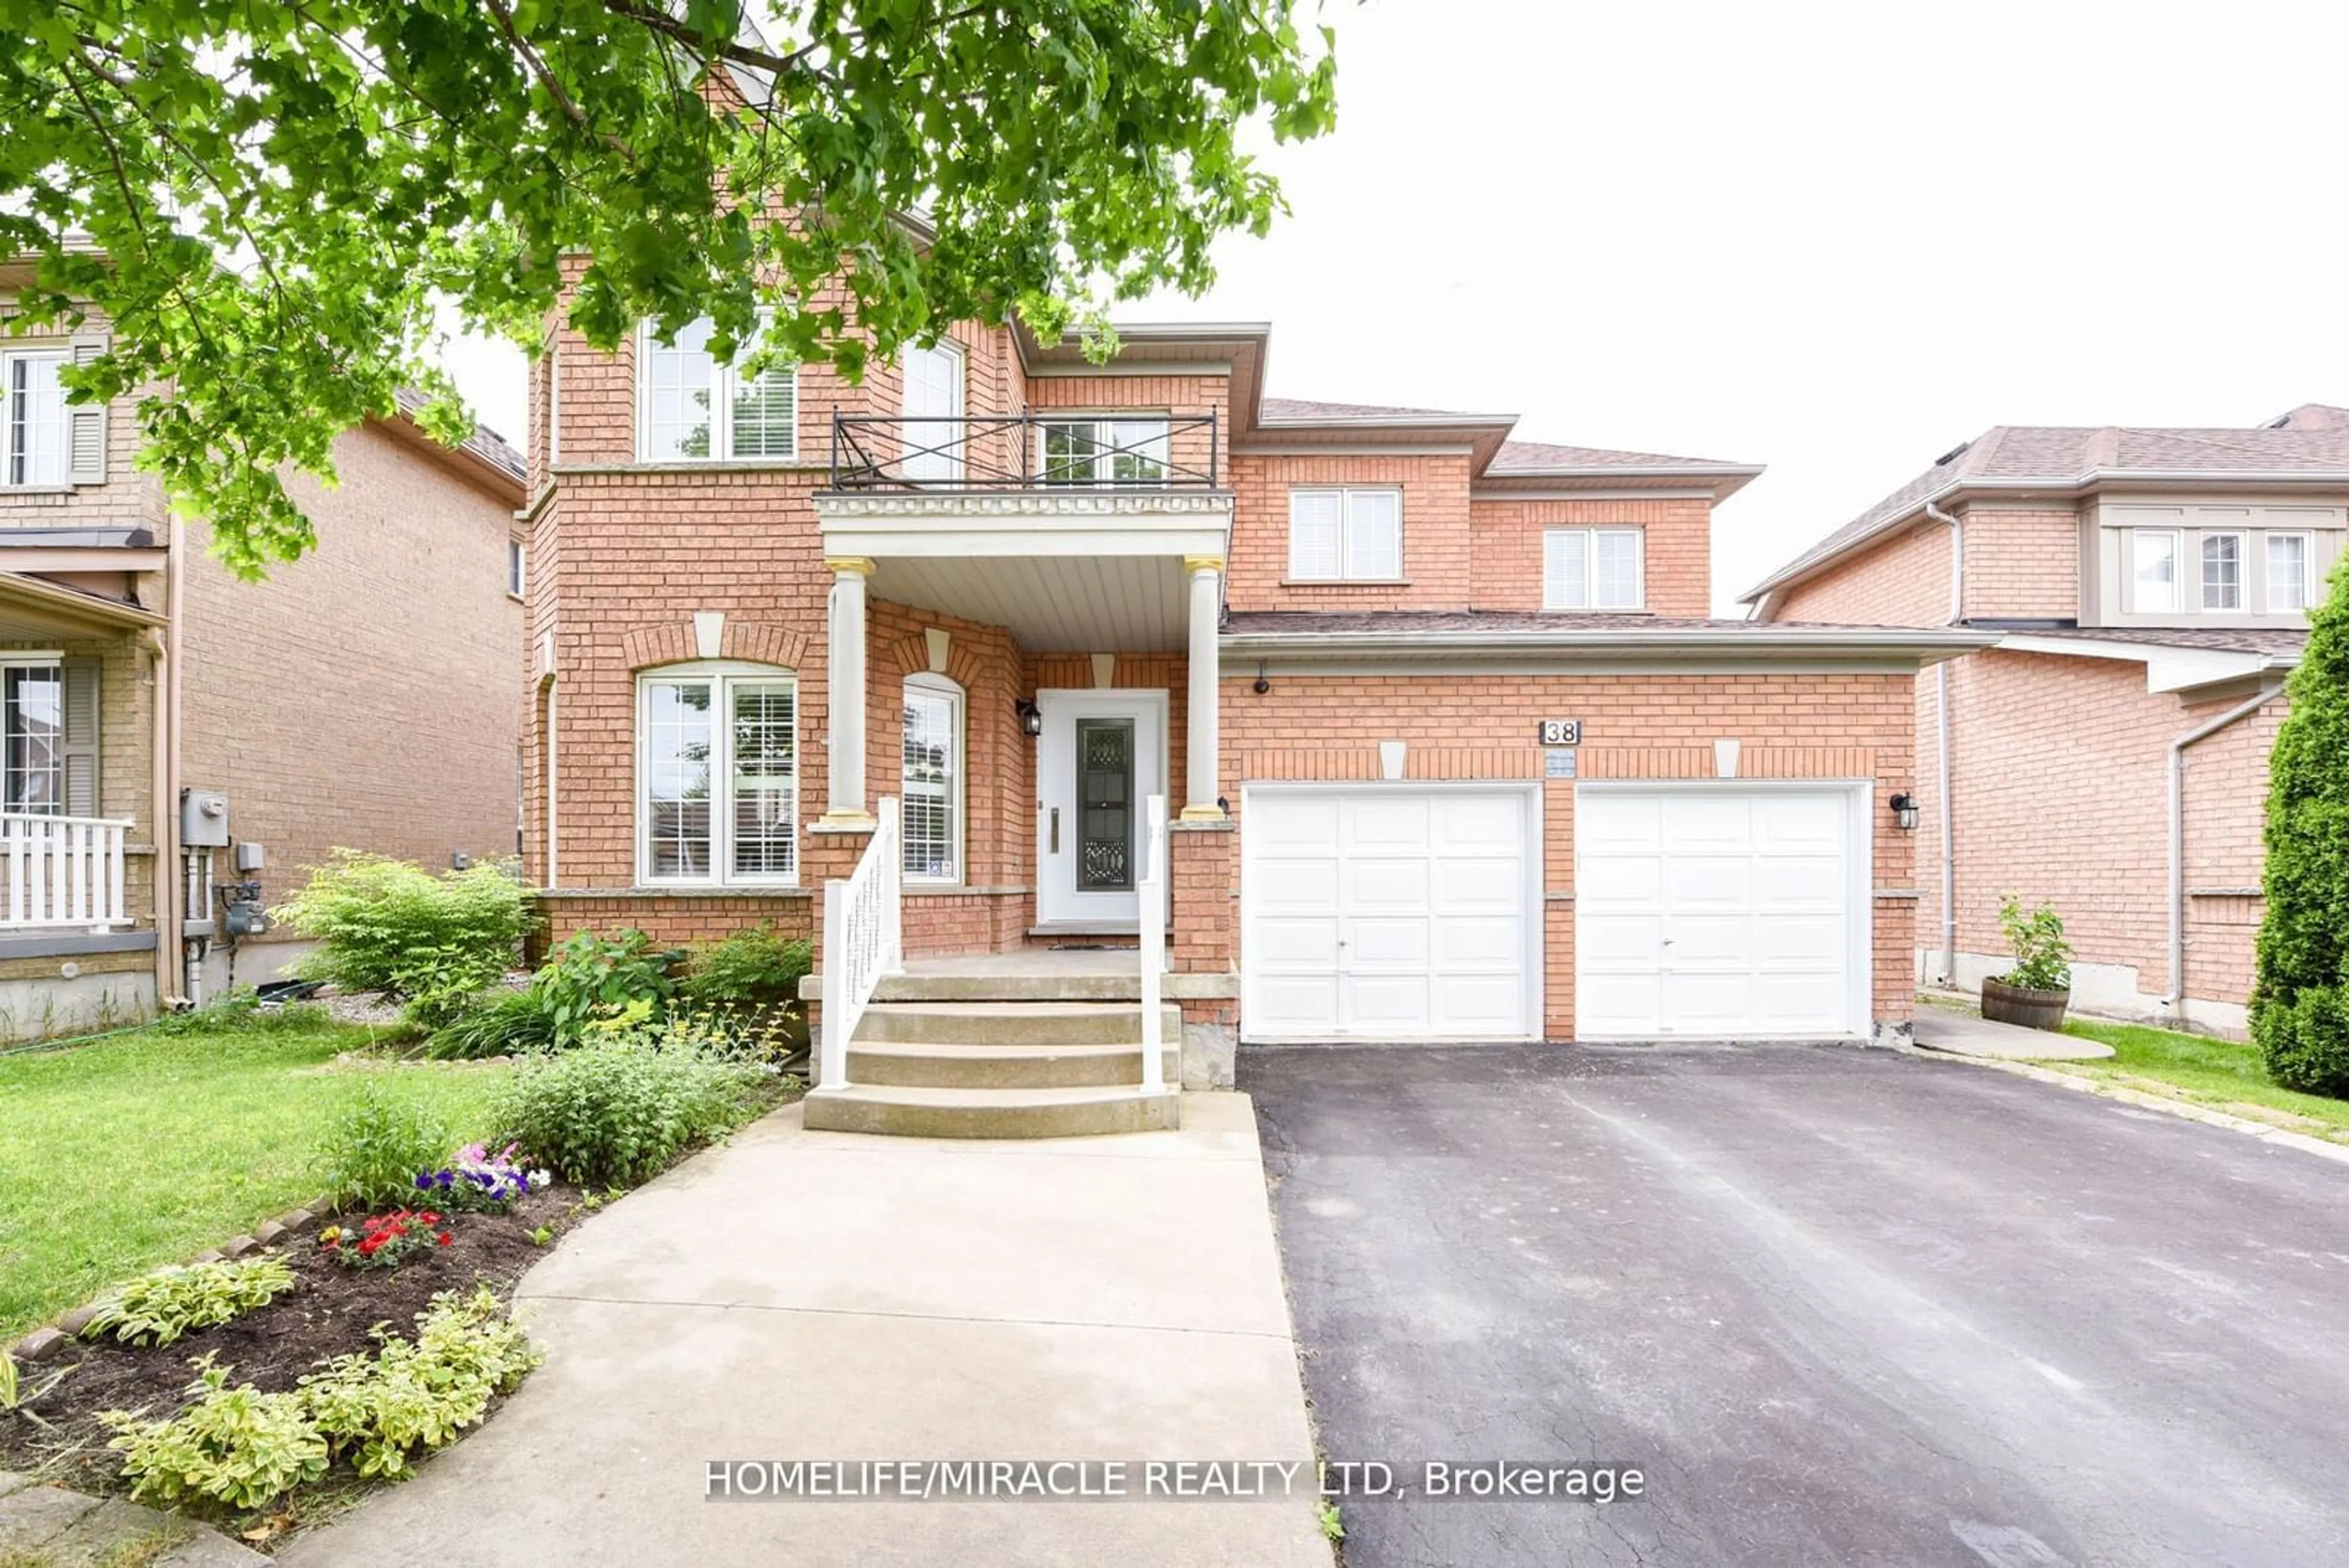 Home with brick exterior material for 38 Mint Leaf Blvd, Brampton Ontario L6R 2K4